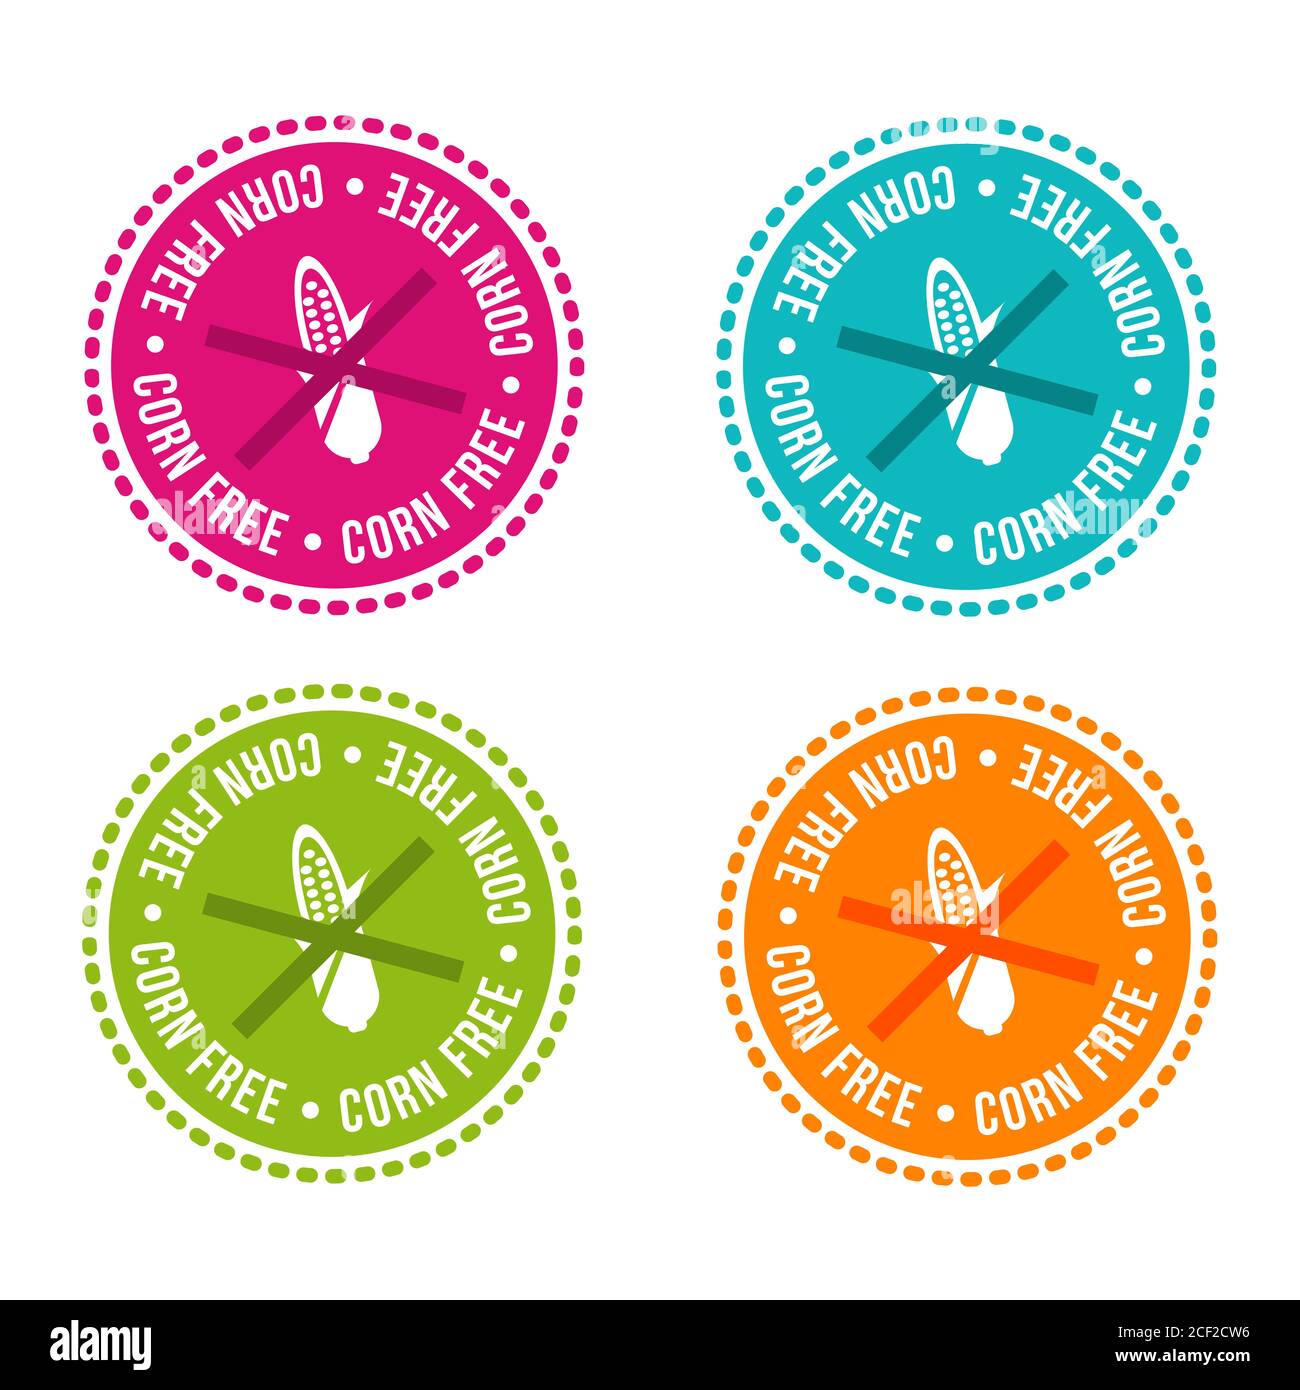 Set of Allergen free Badges. Corn free. Vector hand drawn Signs. Can be used for packaging Design. Stock Photo